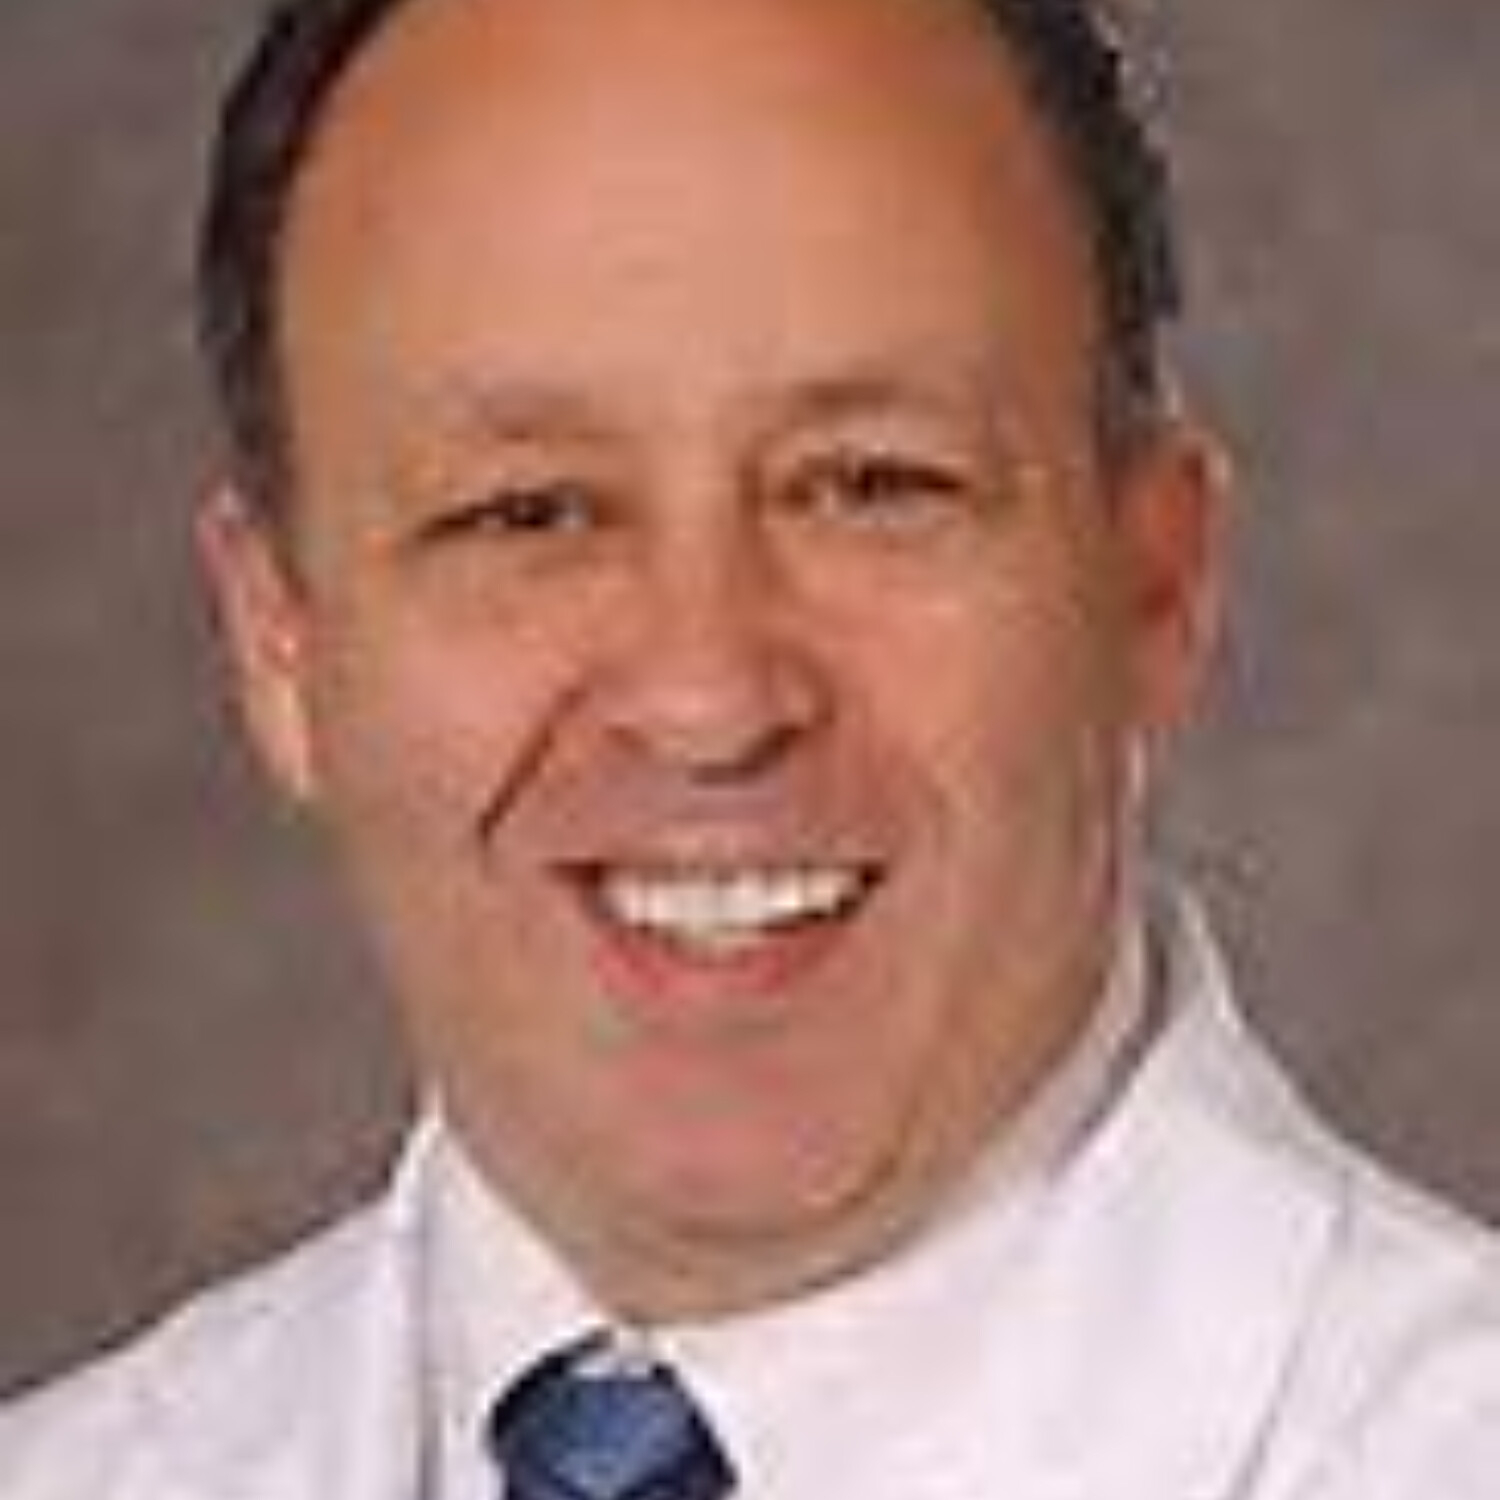 Chatters That Matter Let's Find out about Cancer Treatments, limitations and Challenges with Oncologist Professor Dr. J.Tuscano - PART 1